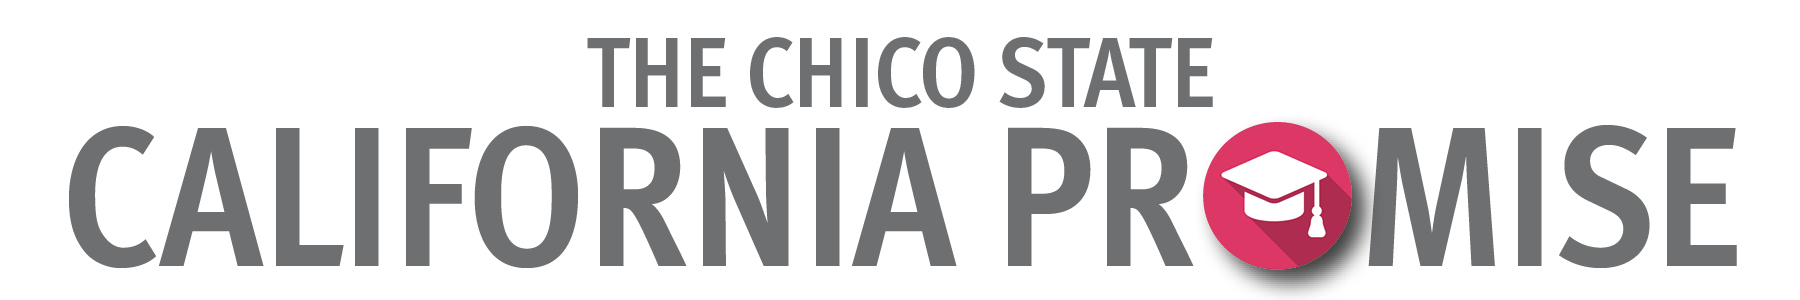 The Chico State California Promise